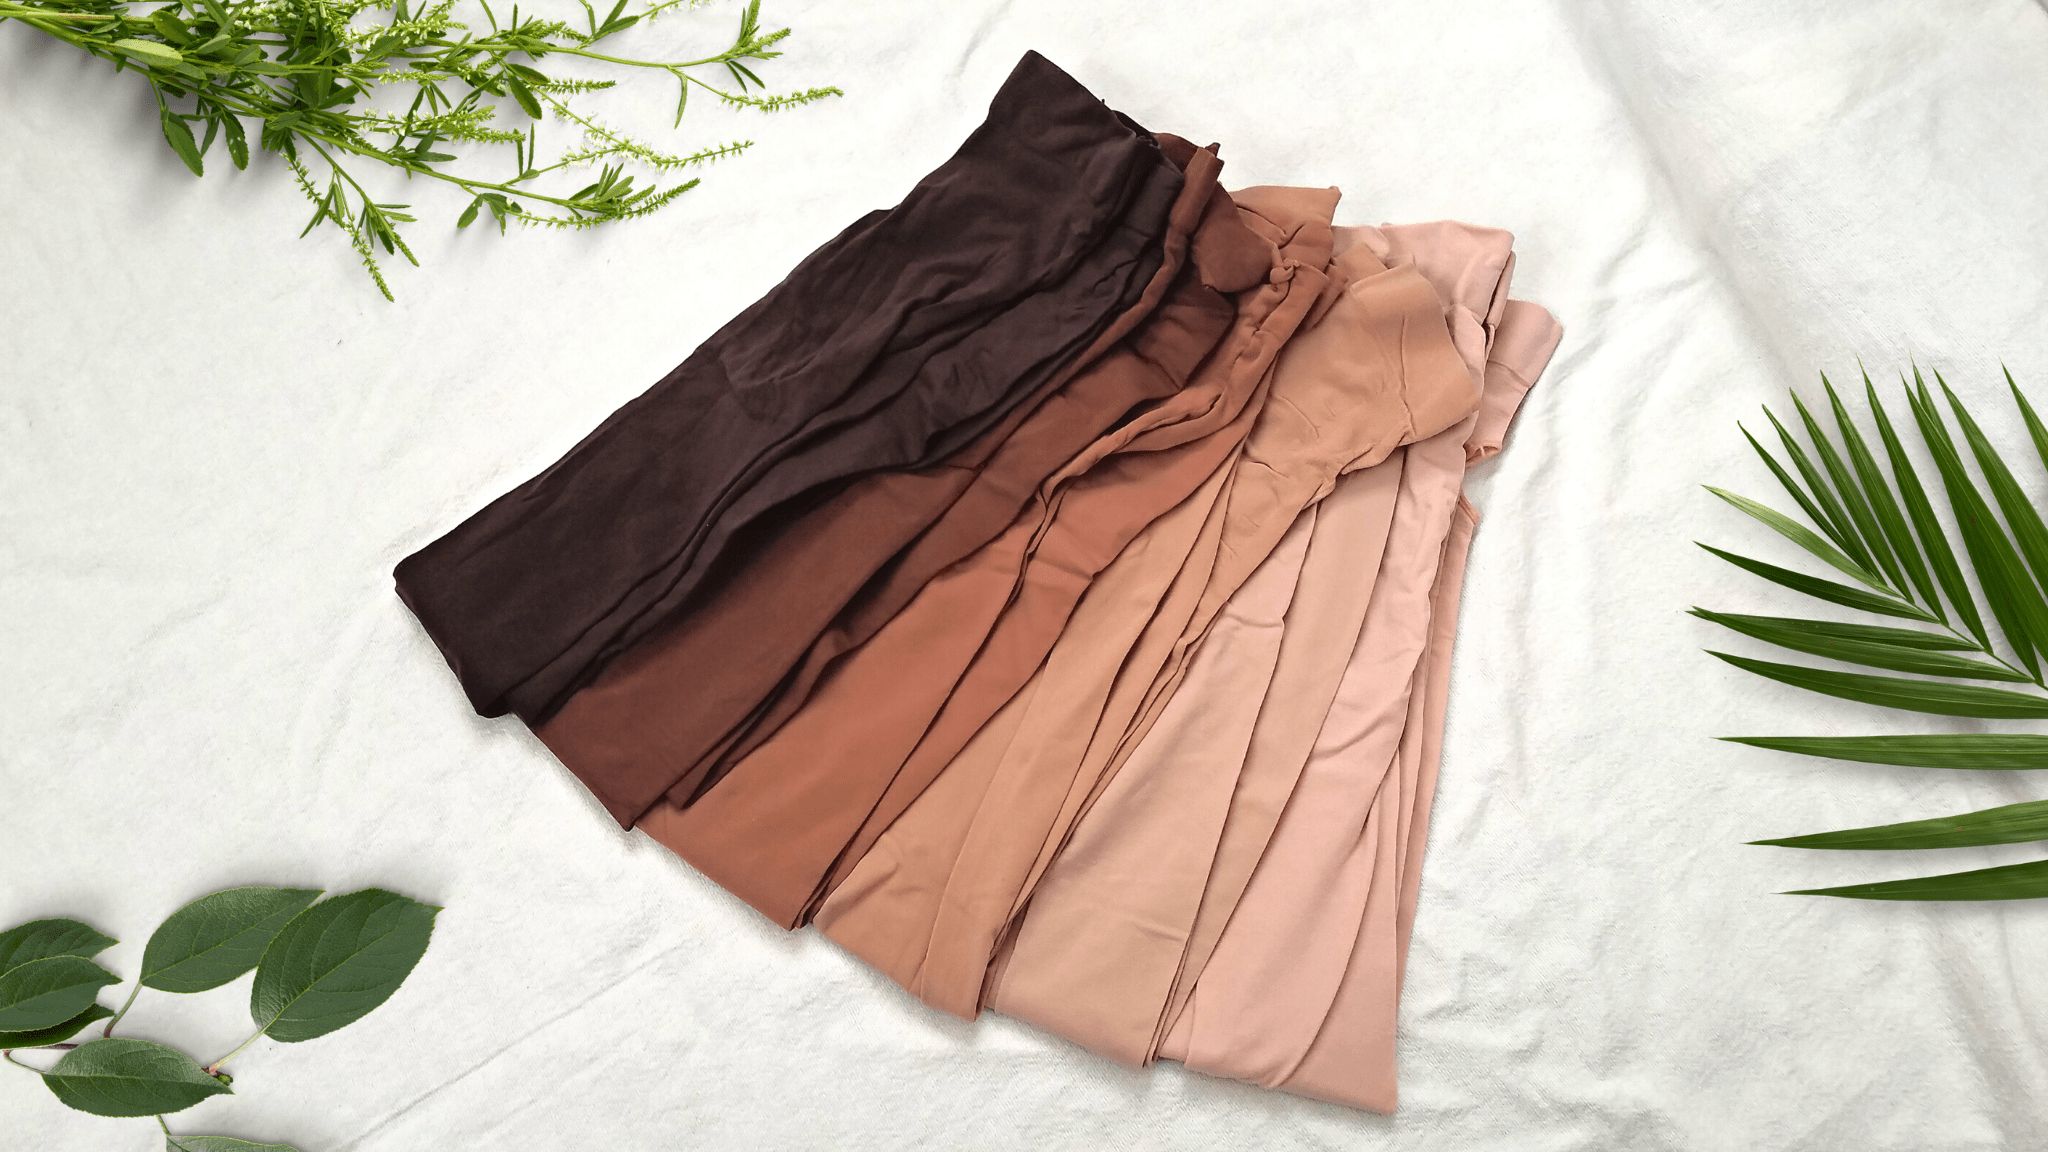 6 nude shades of dance tights arranged from dark to light.